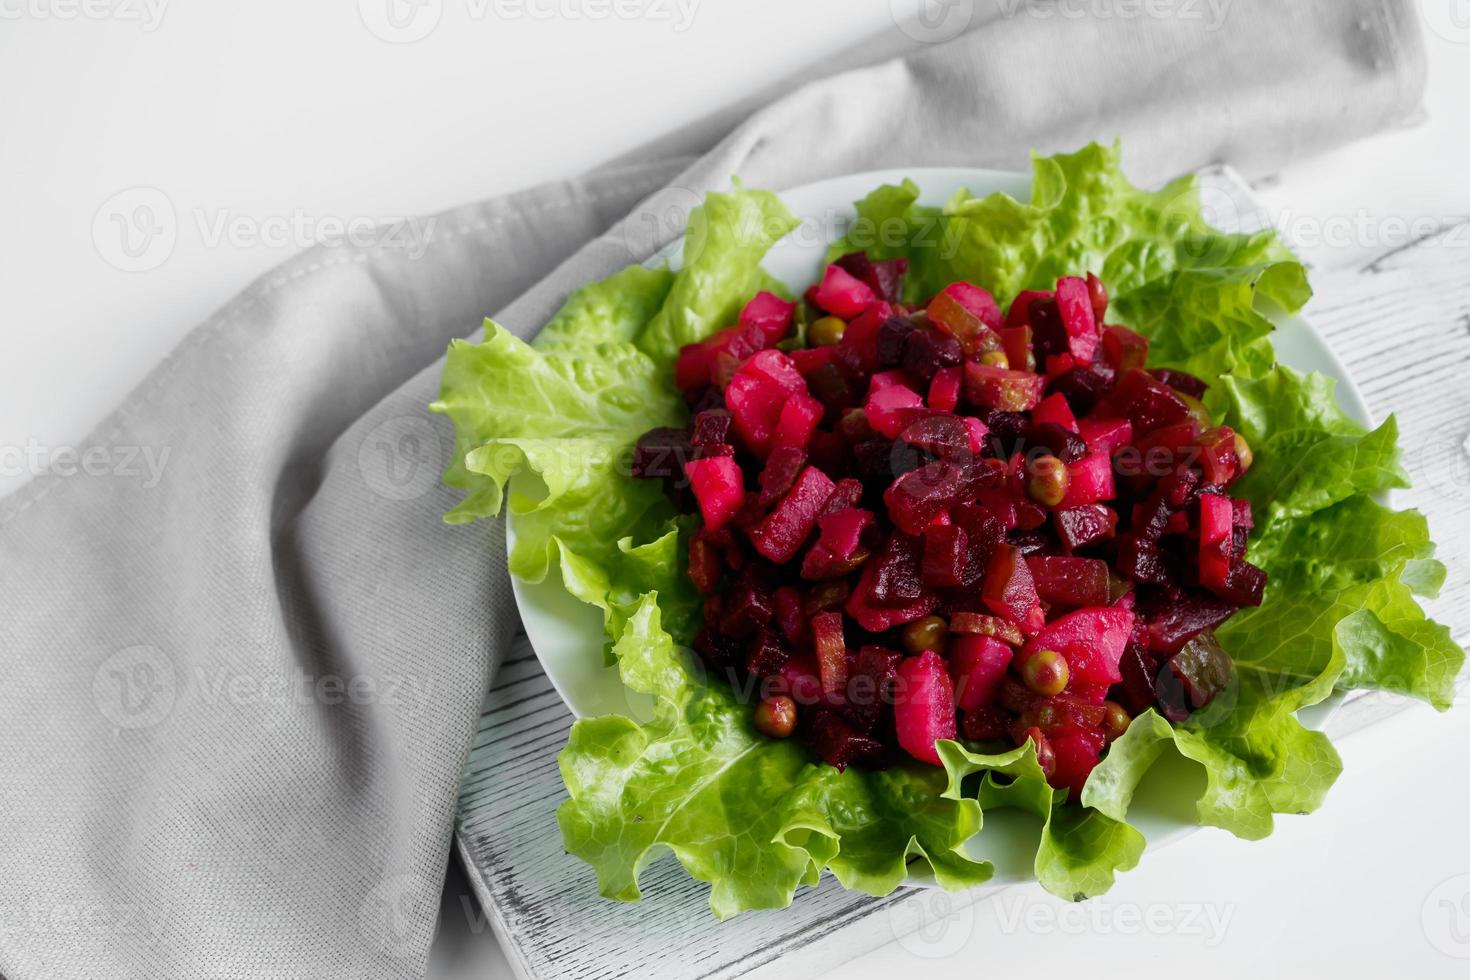 Russian salad vinaigrette on a gray background. Vegetarian dish with beets on a plate. photo